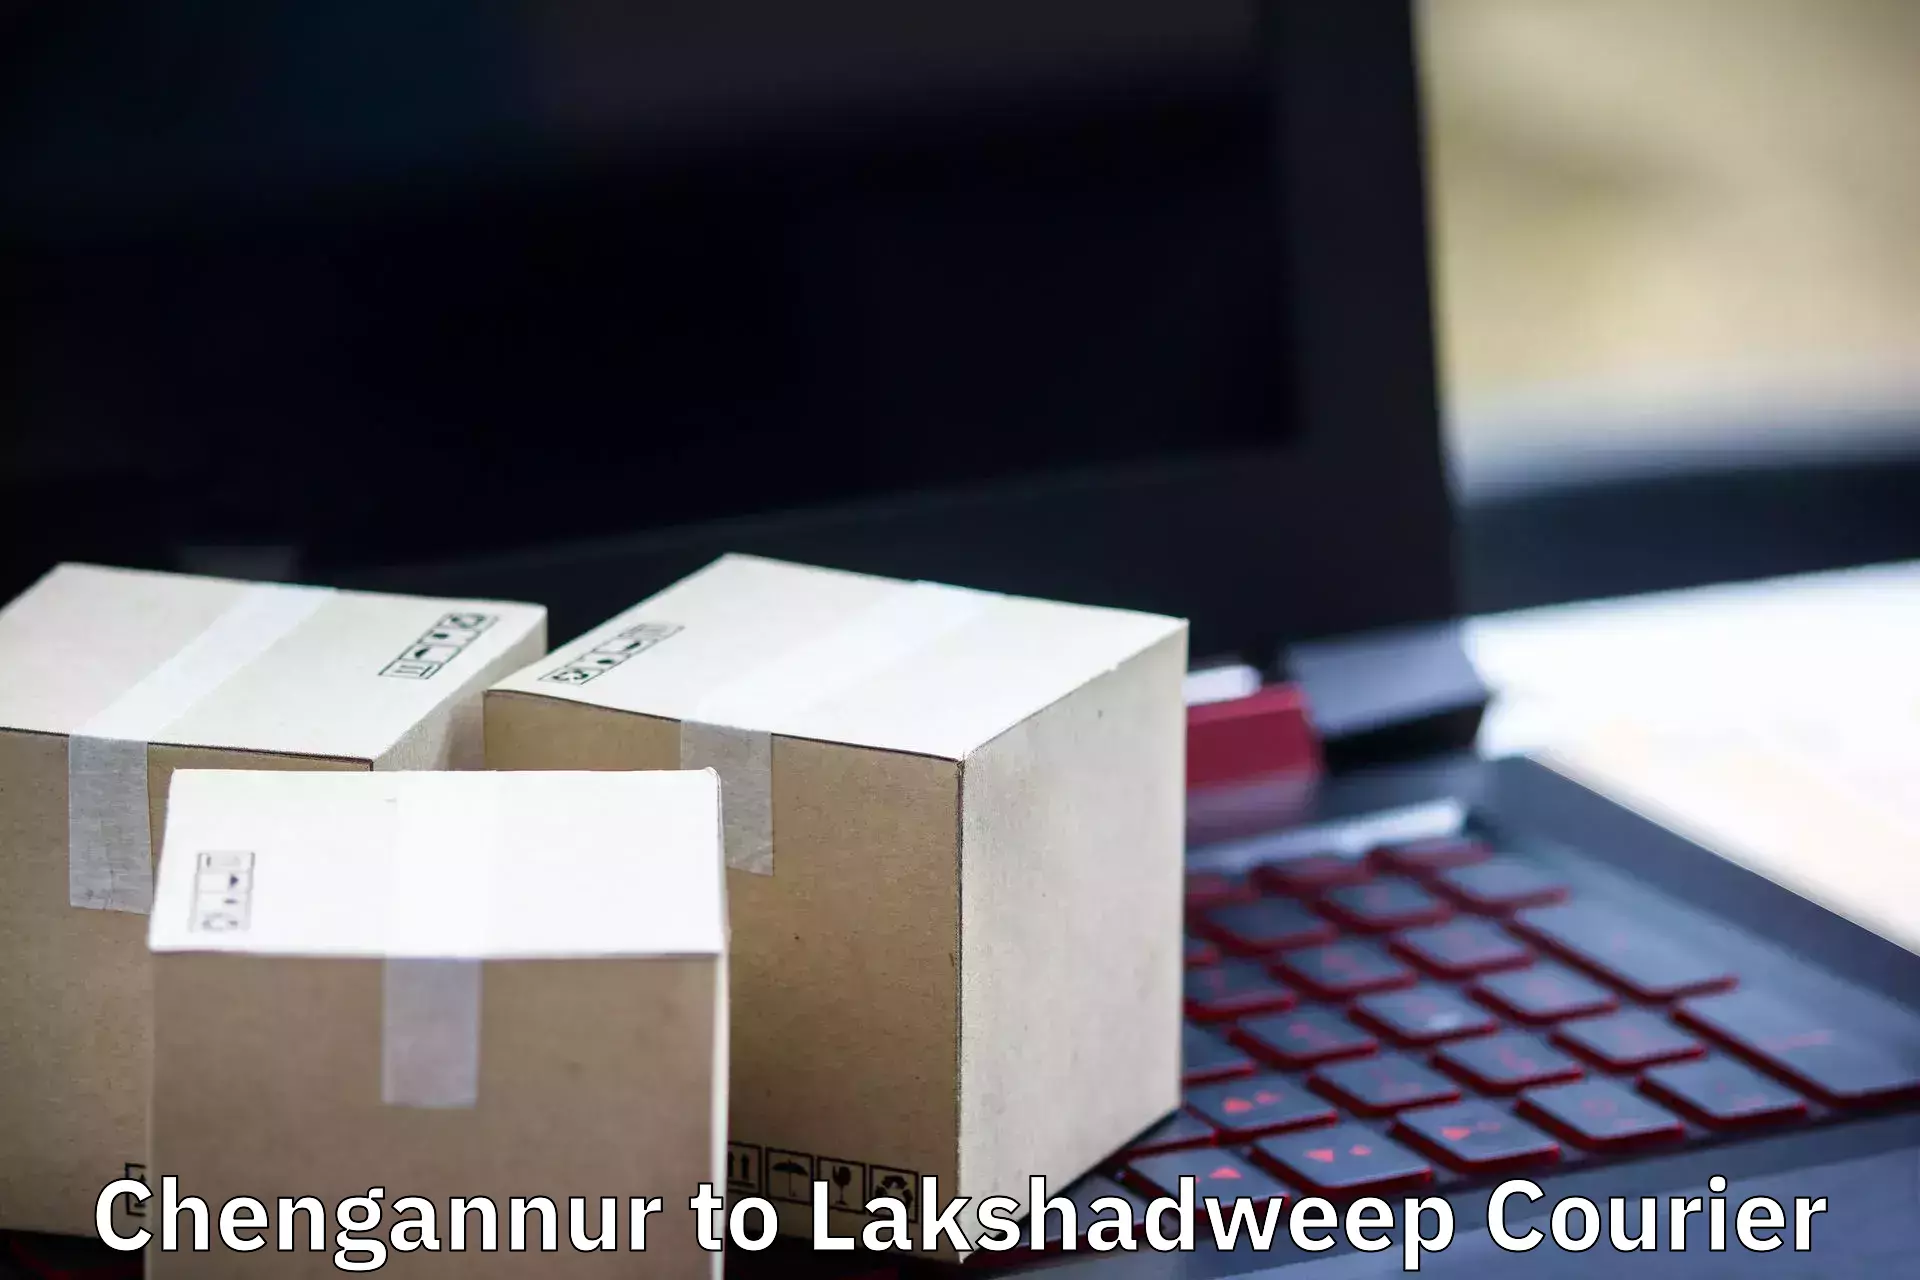 Furniture delivery service Chengannur to Lakshadweep